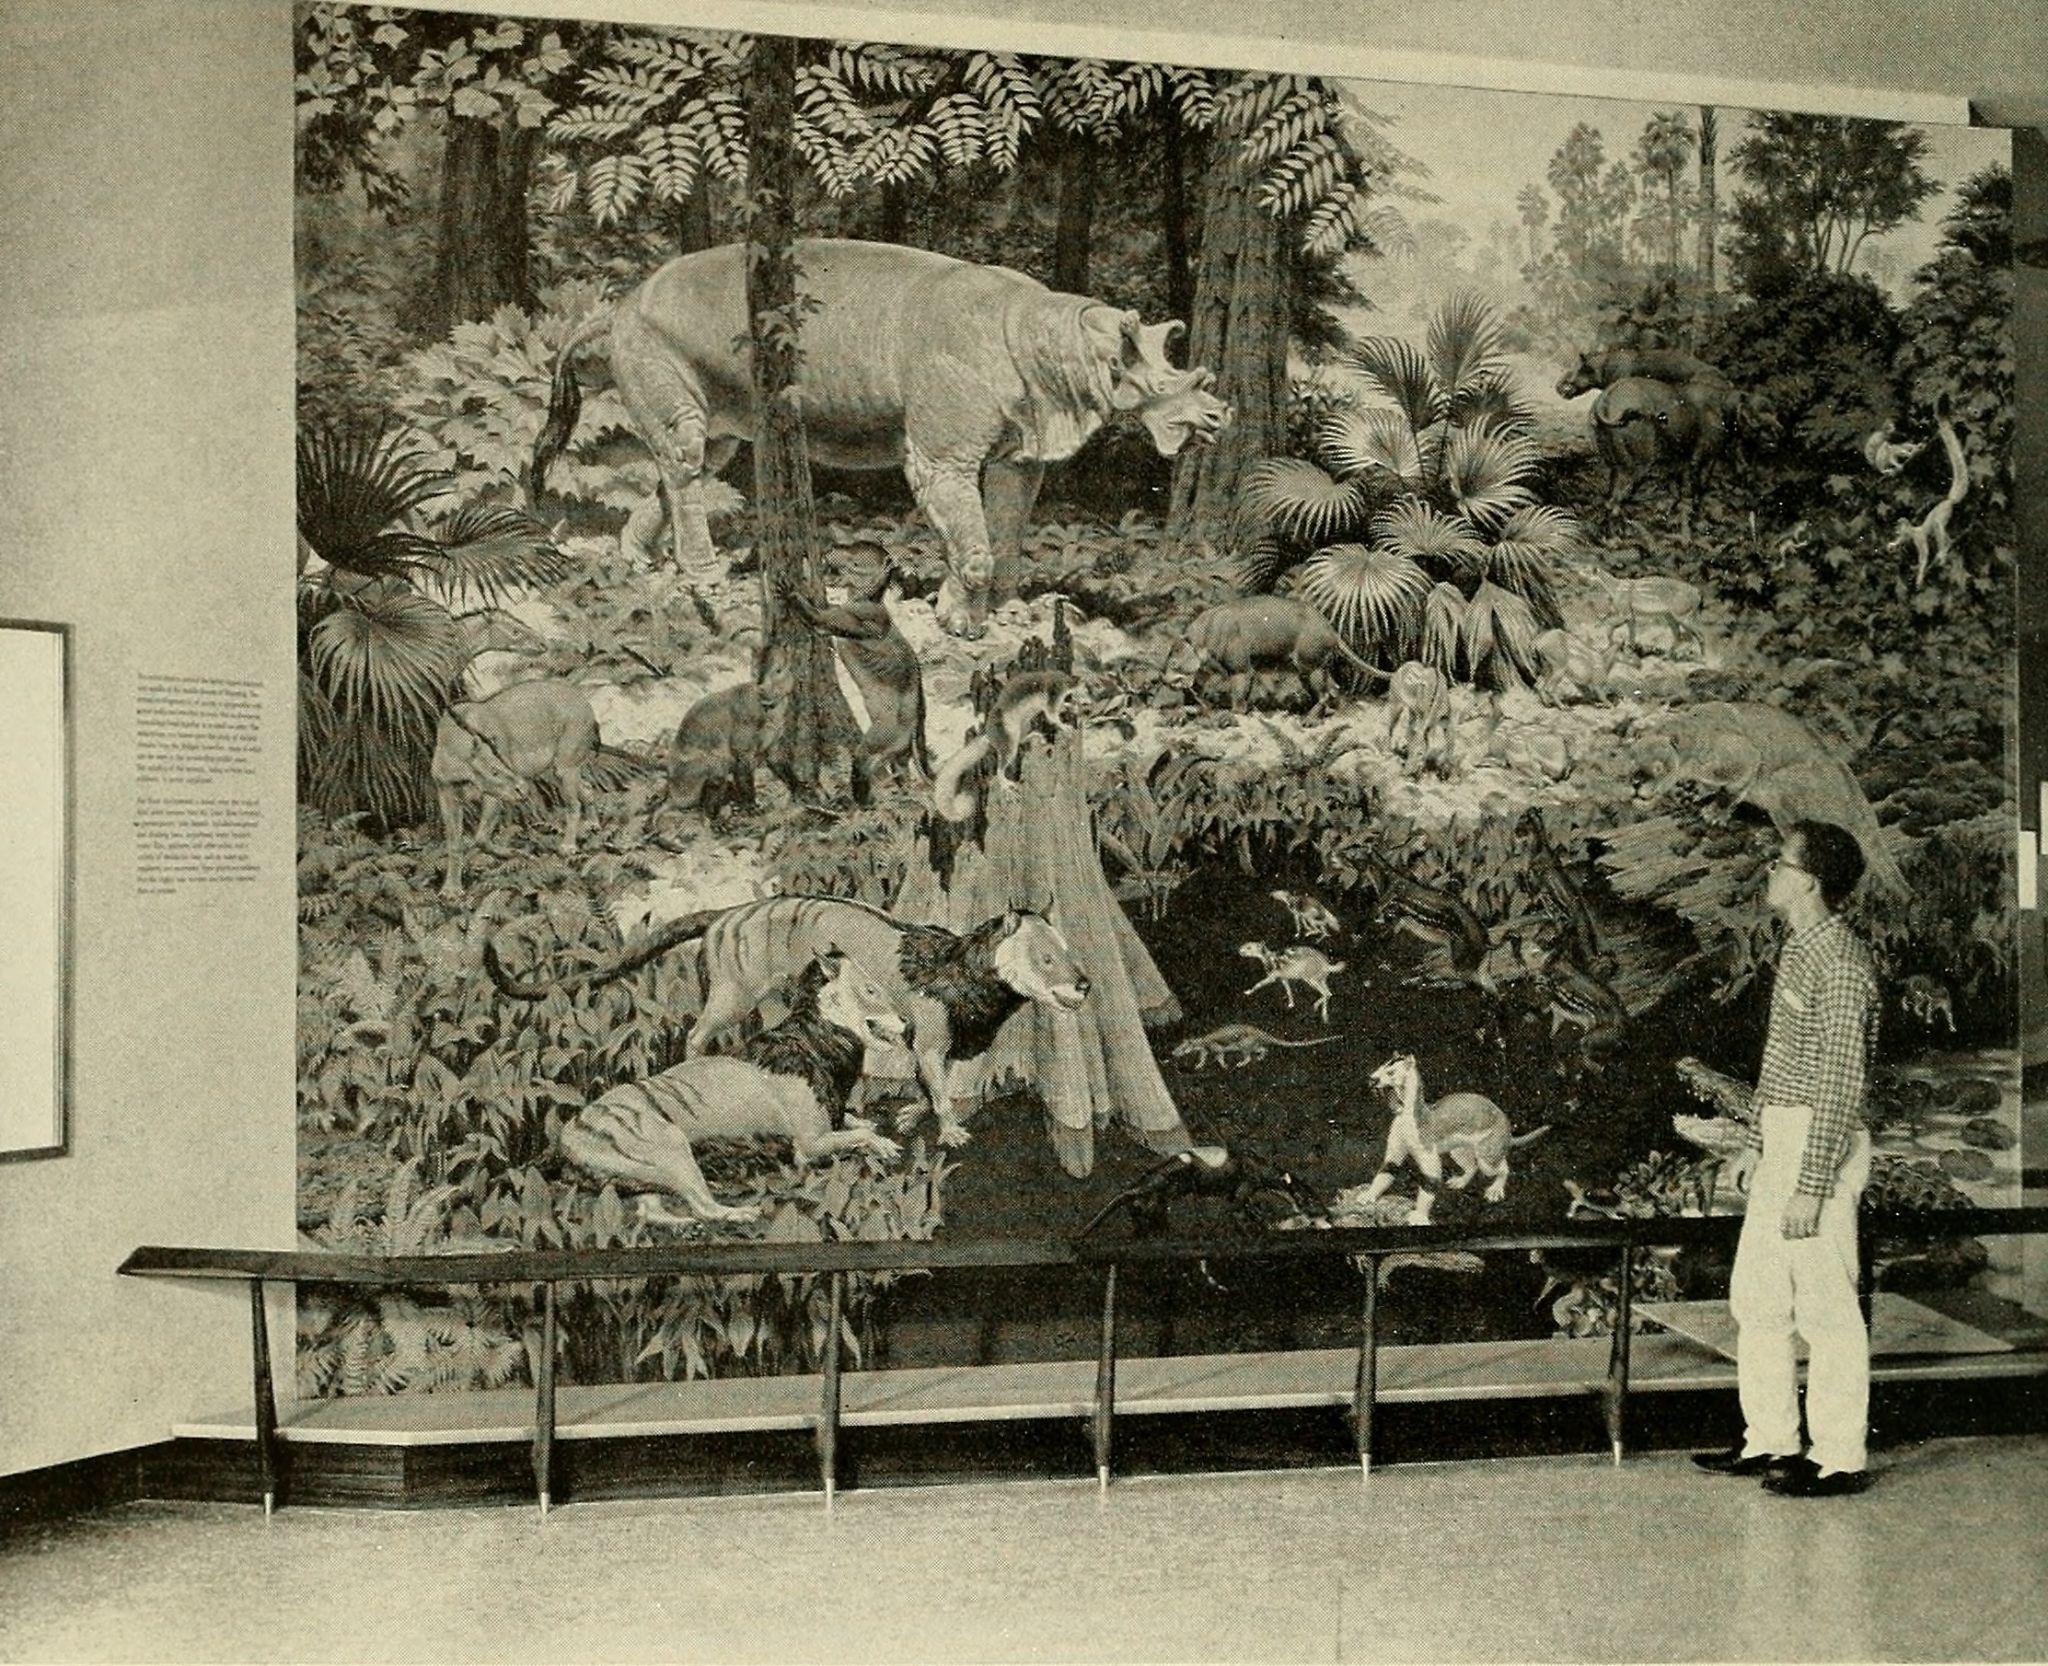 Person in front of a mural depicting forest animals.